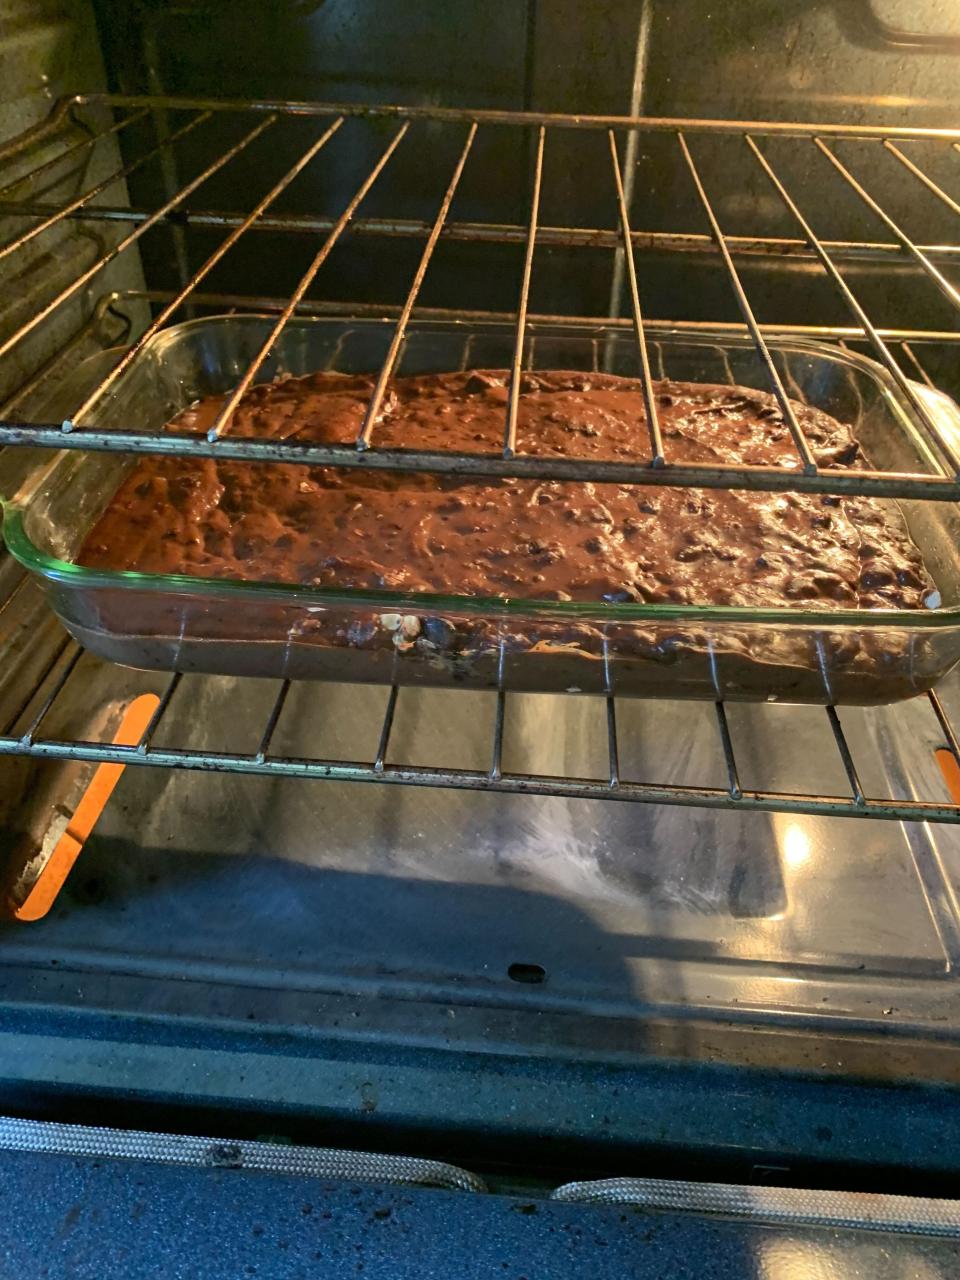 a pan of brownies in the oven